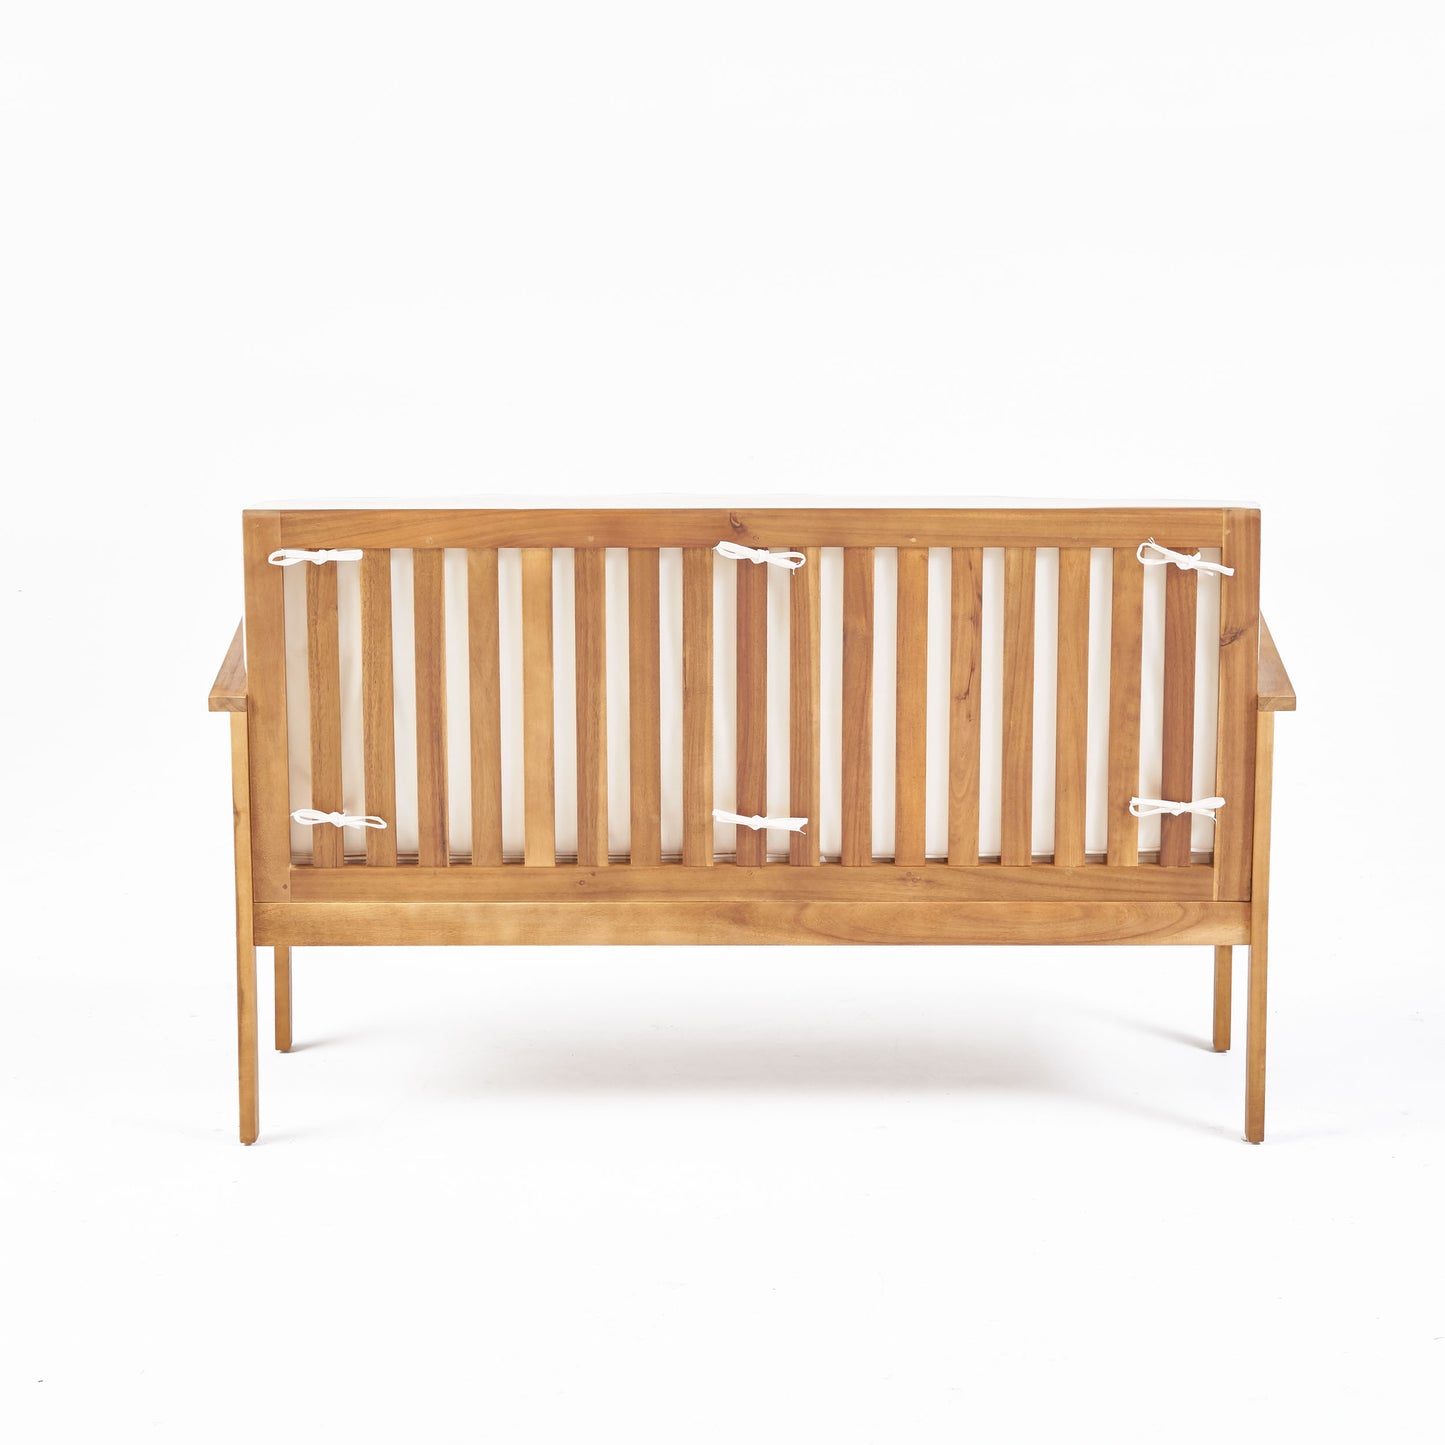 Luna Outdoor Finished Acacia Wood Bench with Water Resistant Fabric Cushion